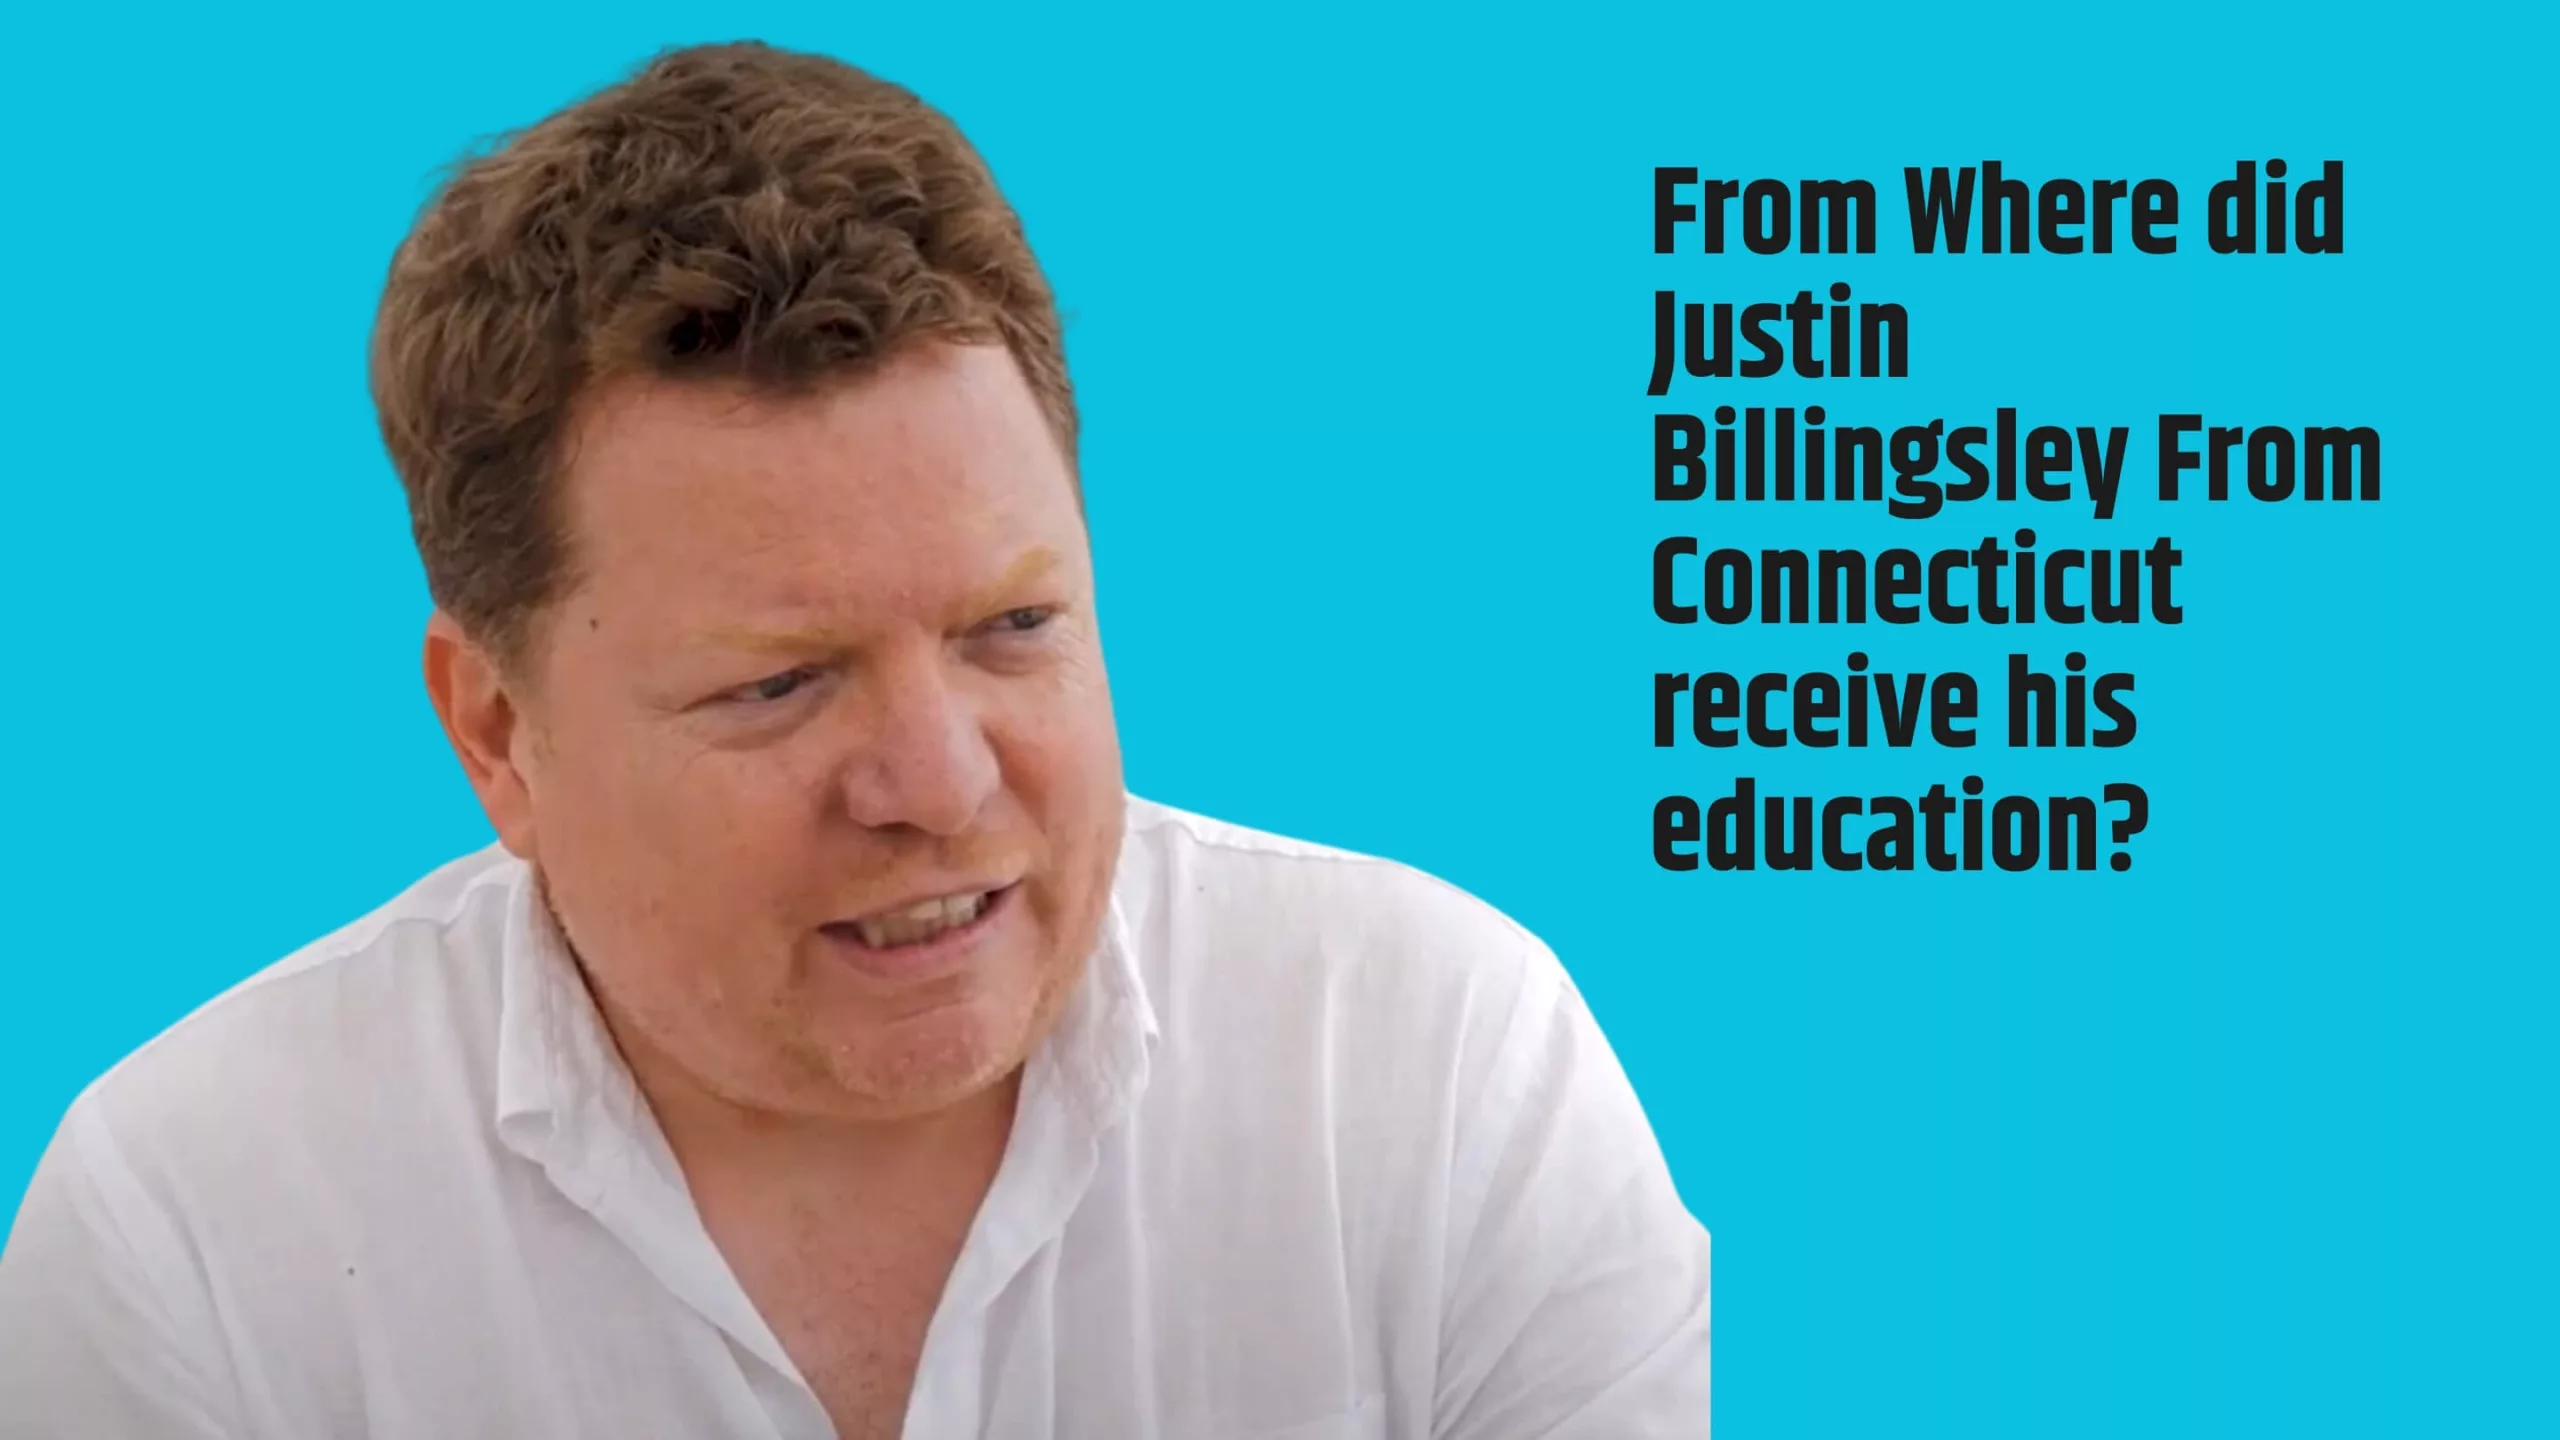 From Where did Justin Billingsley From Connecticut receive his education?